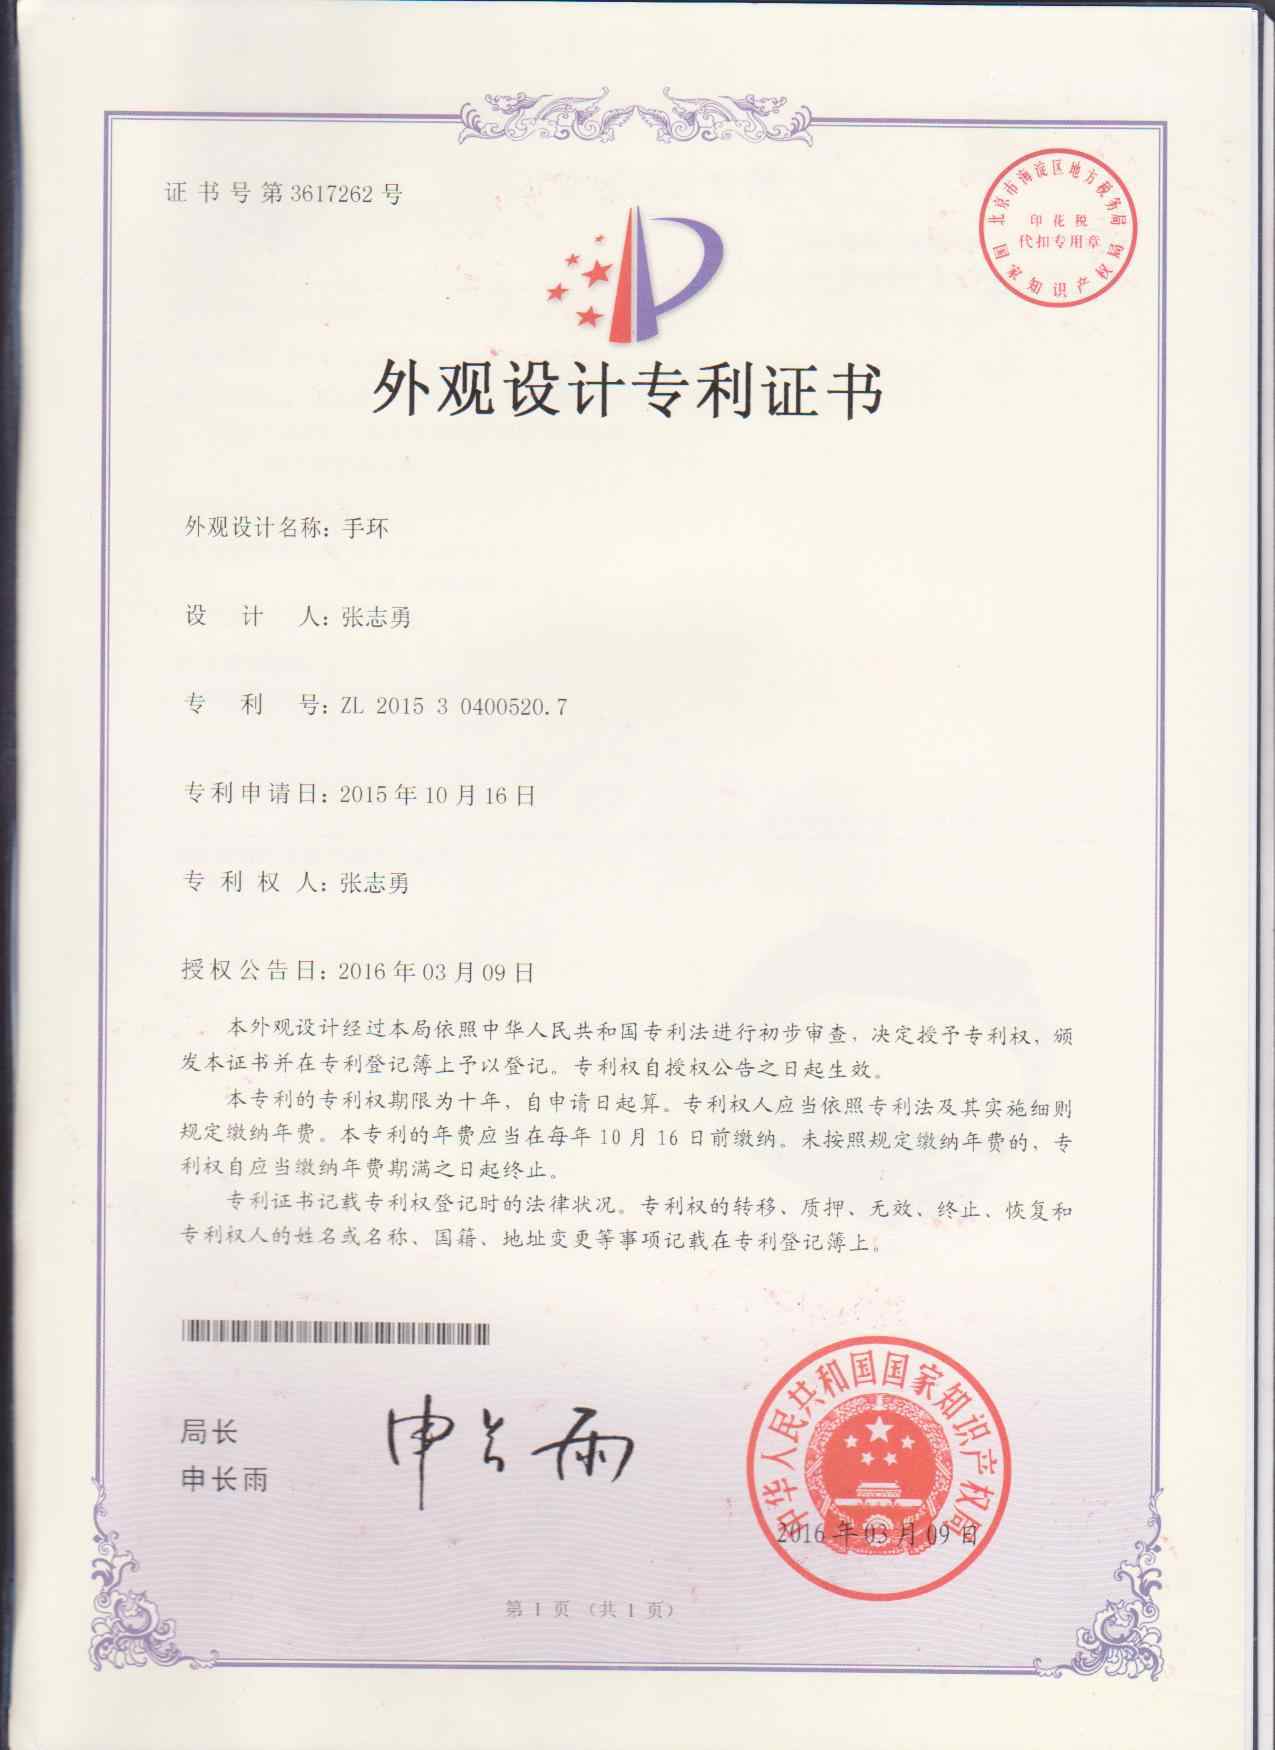 Appearance of the patent certificate of F07